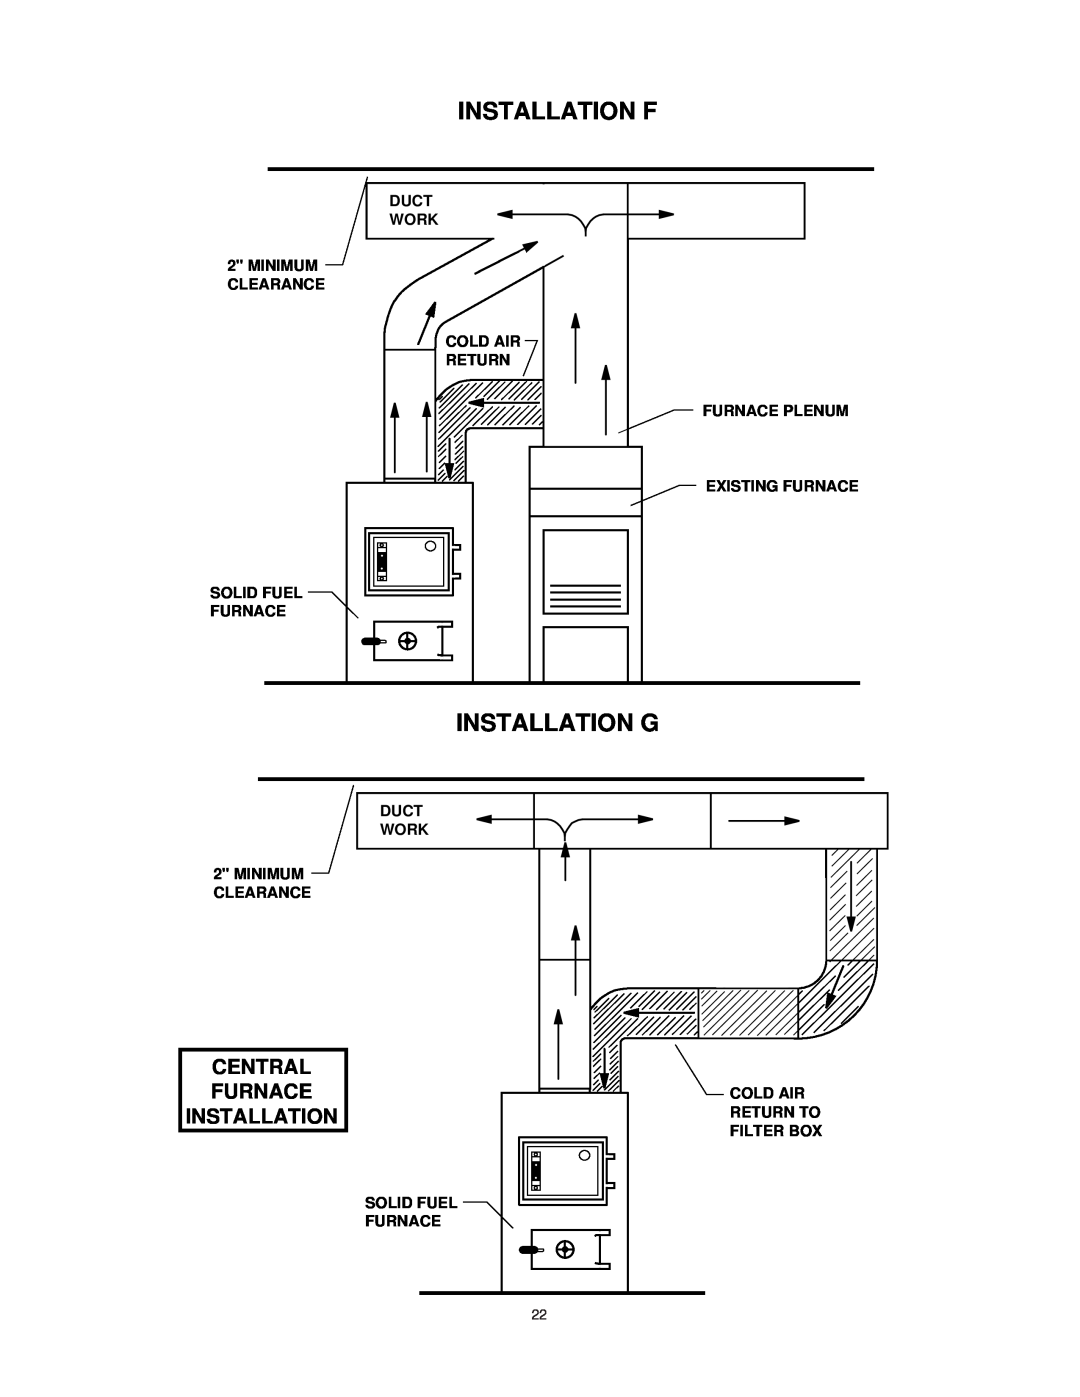 United States Stove 1537G owner manual Installation F, Installation G, Central, Furnace Installation 